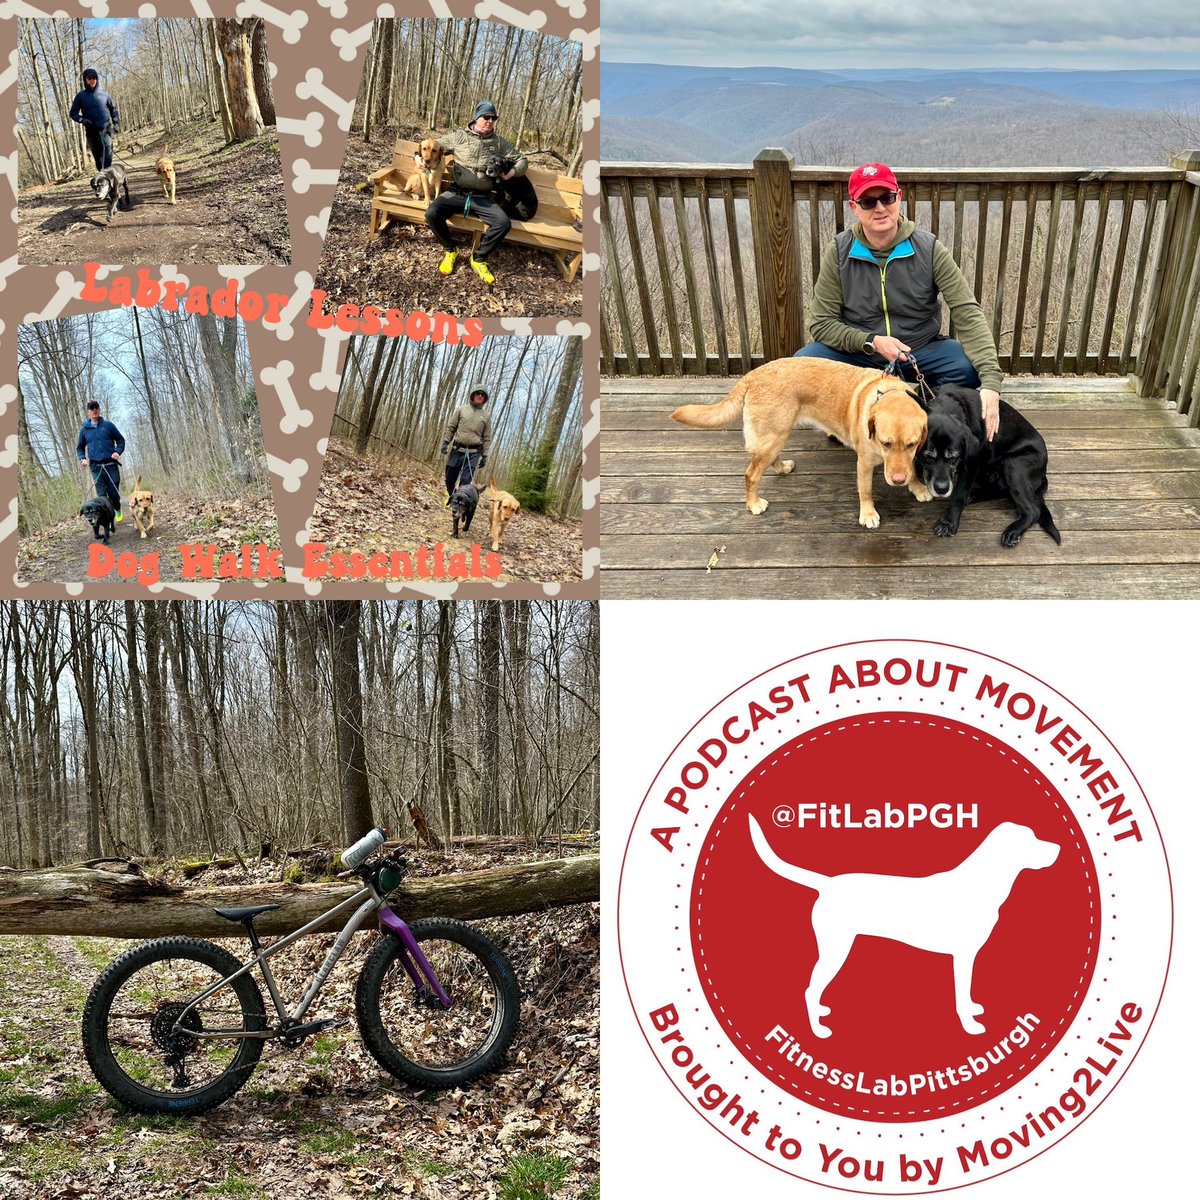 @FitLabPGH promotes #movementisalifestyle with weekly movement tips & a Labrador Lesson. This week the Labs give use 3 Dog Walk Essentials

Our Movement Tips: Take The Opportunity to Explore & Enjoy Your Surroundings
tinyurl.com/fitlabpghtips1…